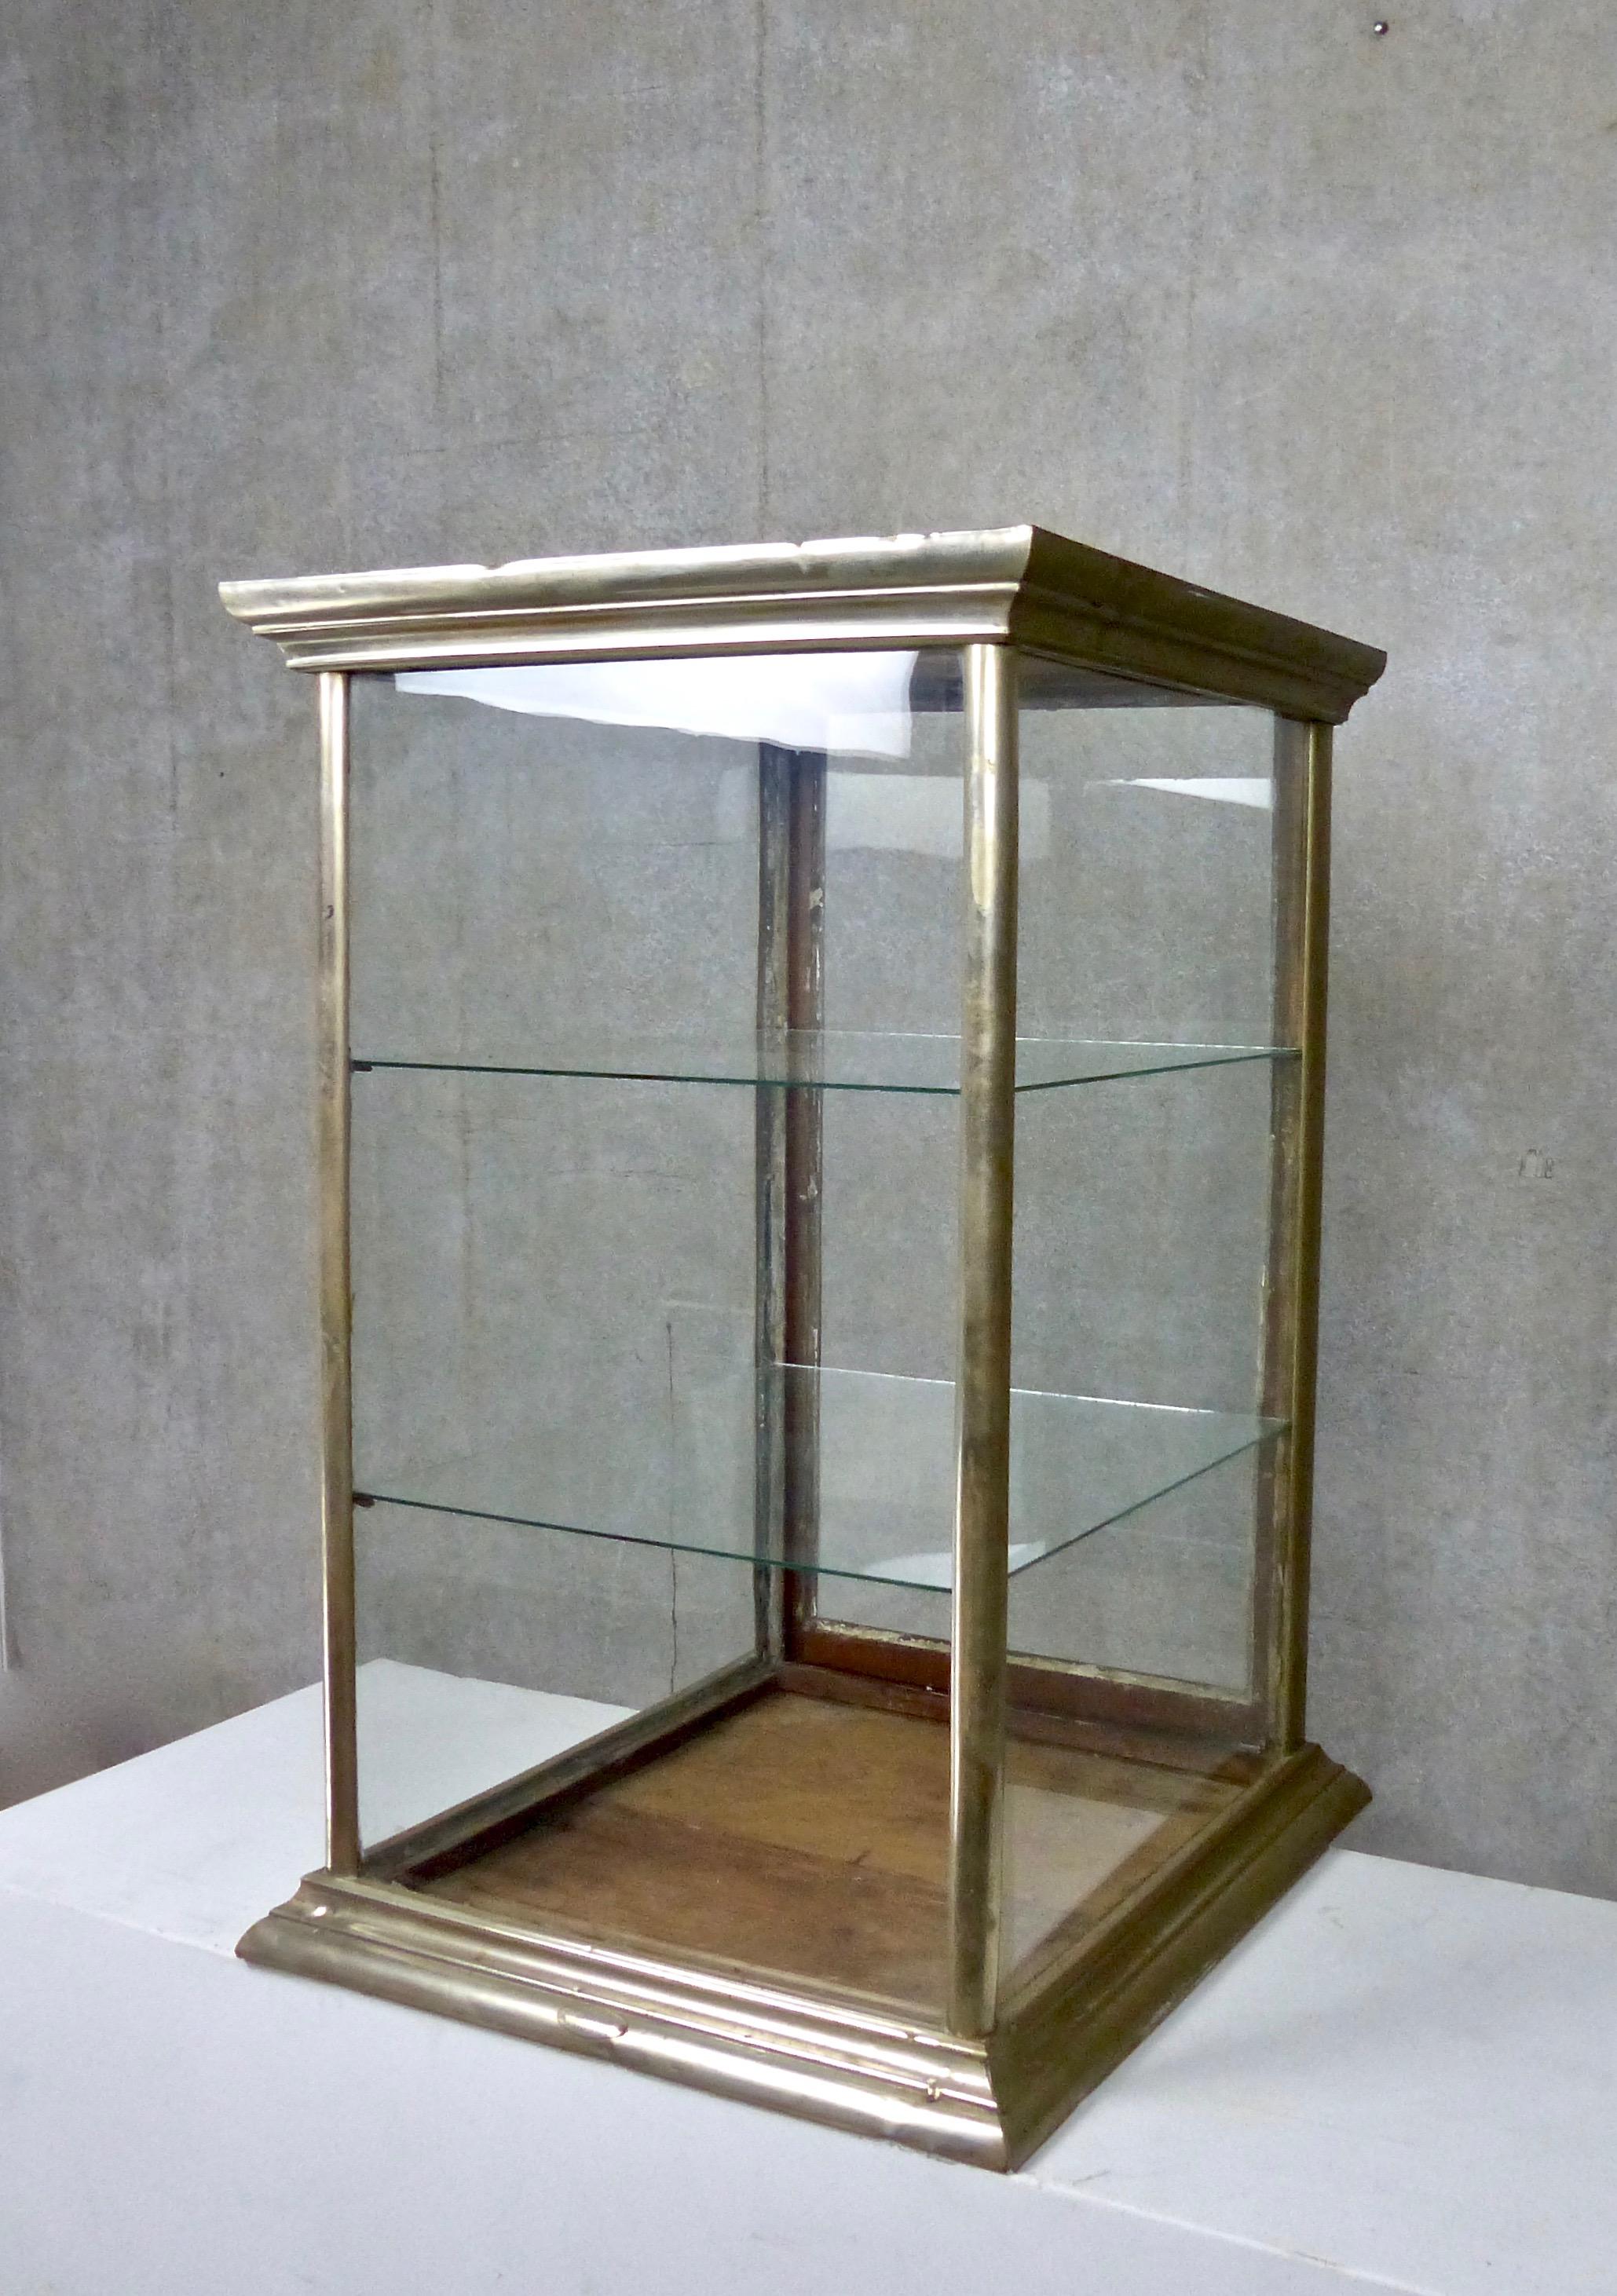 Tabletop display cabinet with glass on four slides and an intact, nickel-plated wood frame, circa 1920. The rear panel slides up to open. Mercantile unit includes two interior glass shelves. Dimensions: 31 H” x 20 W” x 21 D”.
 